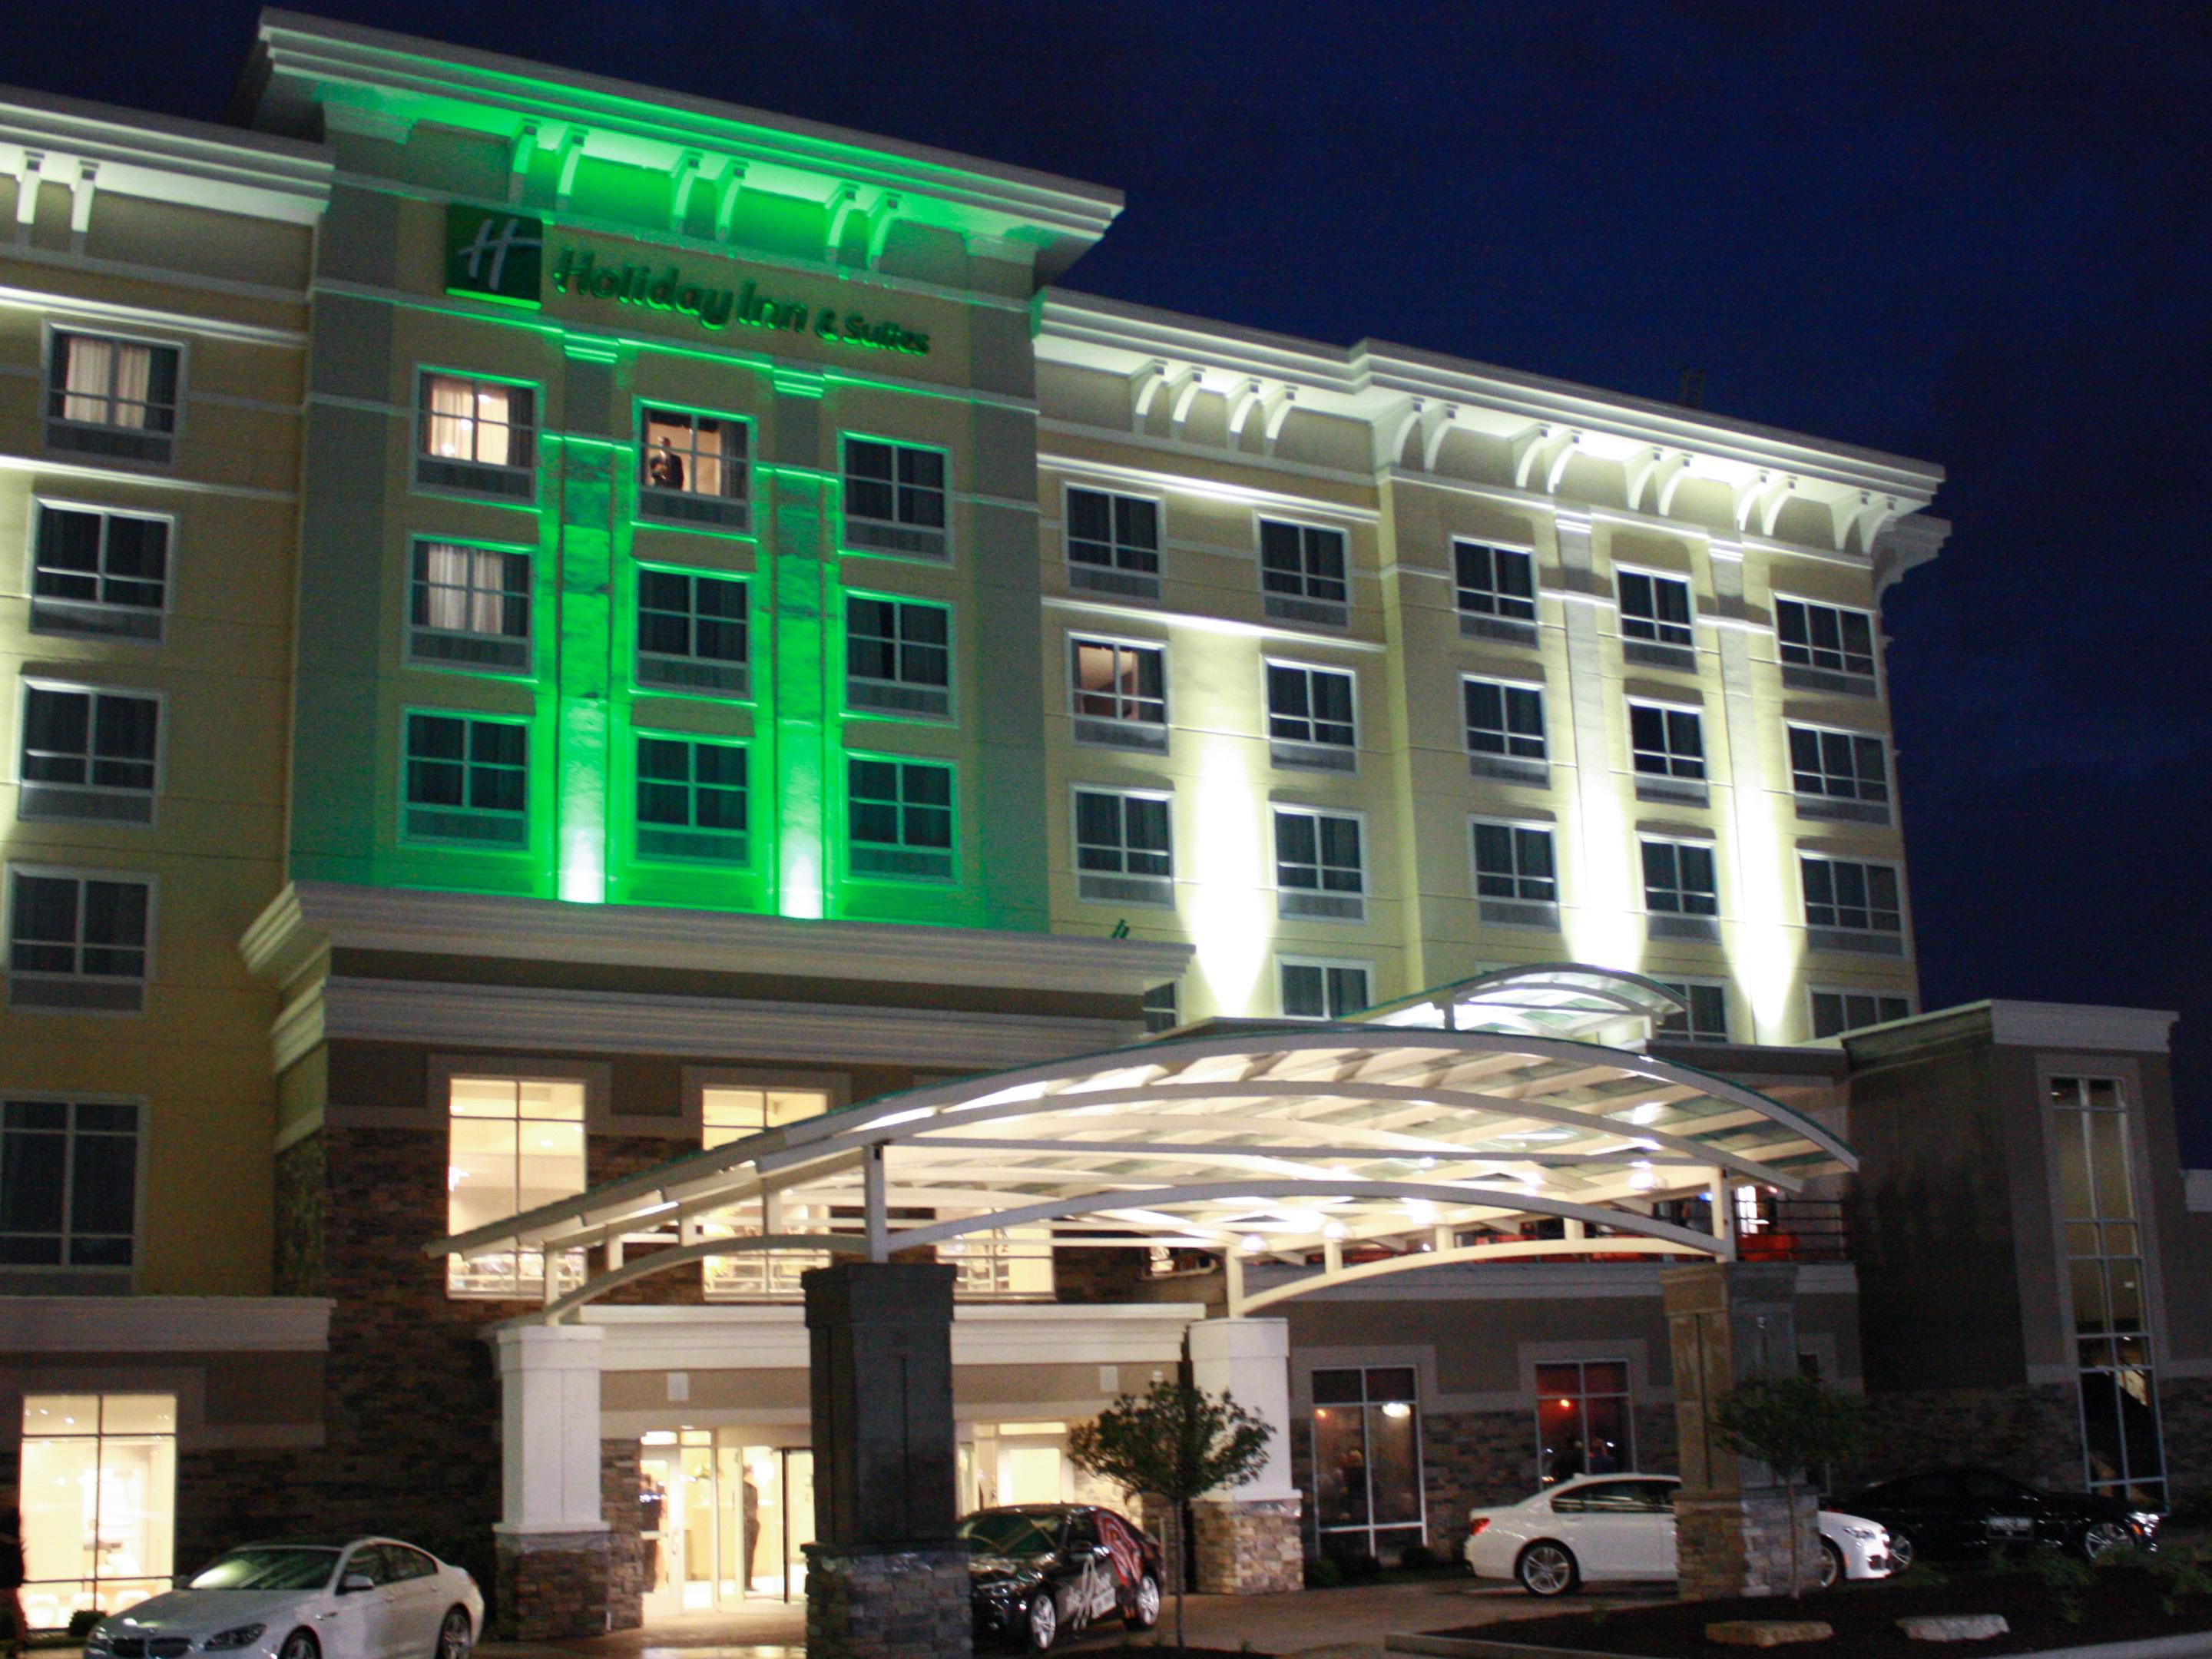 The Holiday Inn & Suites is not only a beautiful, newer property, but we have at our core, the values of a Midwestern family owned business and over 90 years of hospitality experience in our upper management team. From the guest rooms to your food and beverage, we strive to exceed your expectations and create a wonderful, memorable experience.